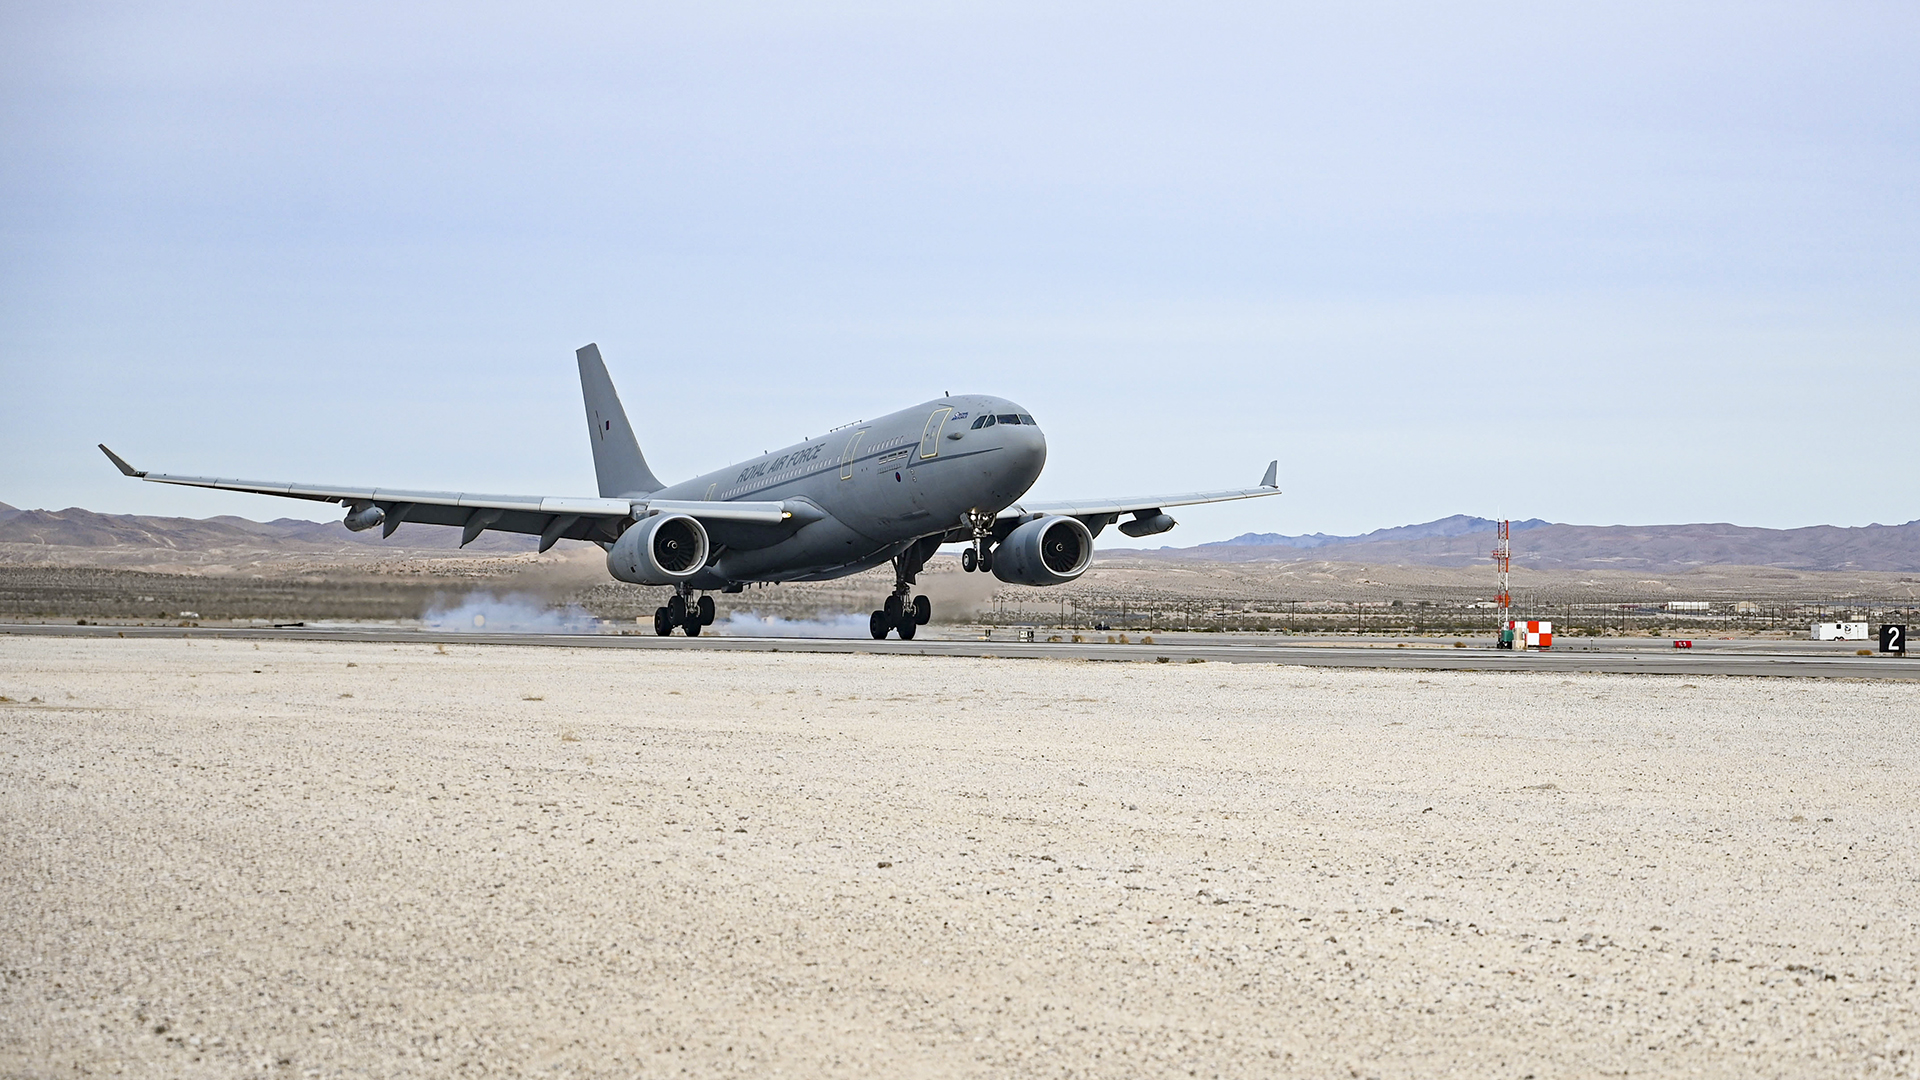 Royal Air Force Arrive in the United States to Take Part in Large Scale Exercise